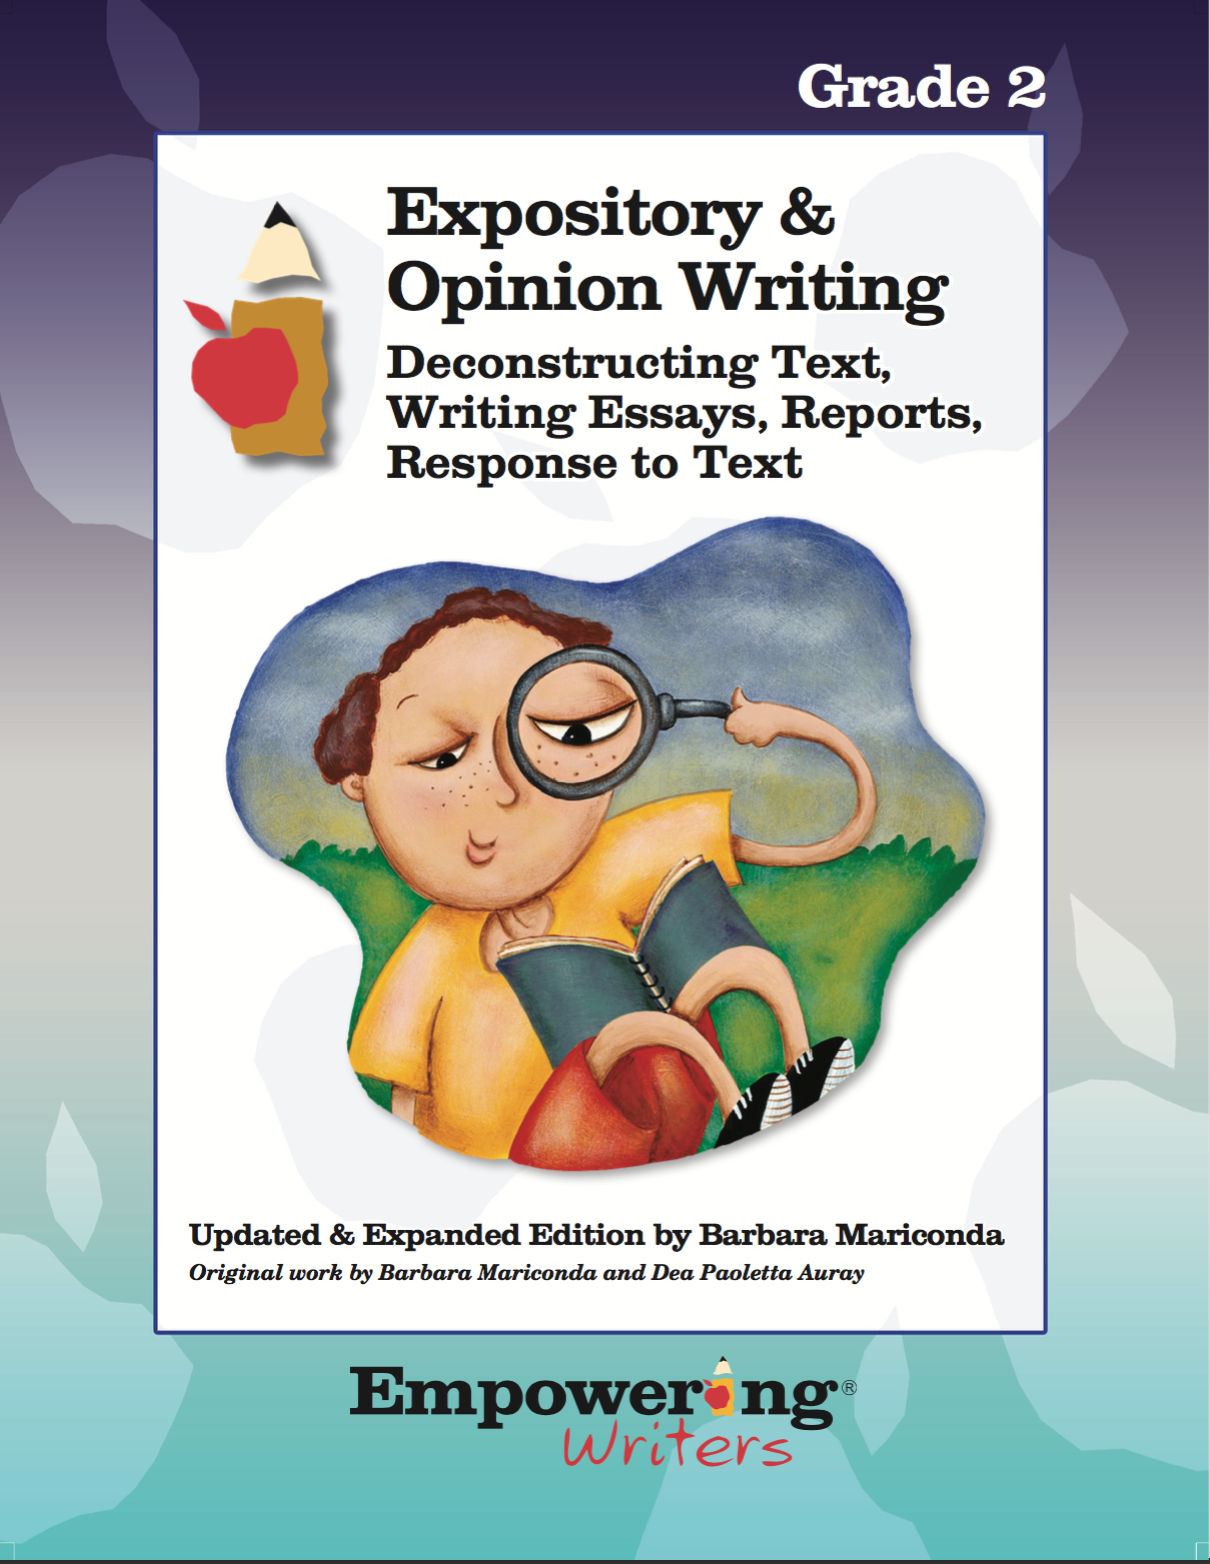 Empowering　Grade　Informational/Expository　Writing　Opinion　–　Guide　(printed)　C　Writers